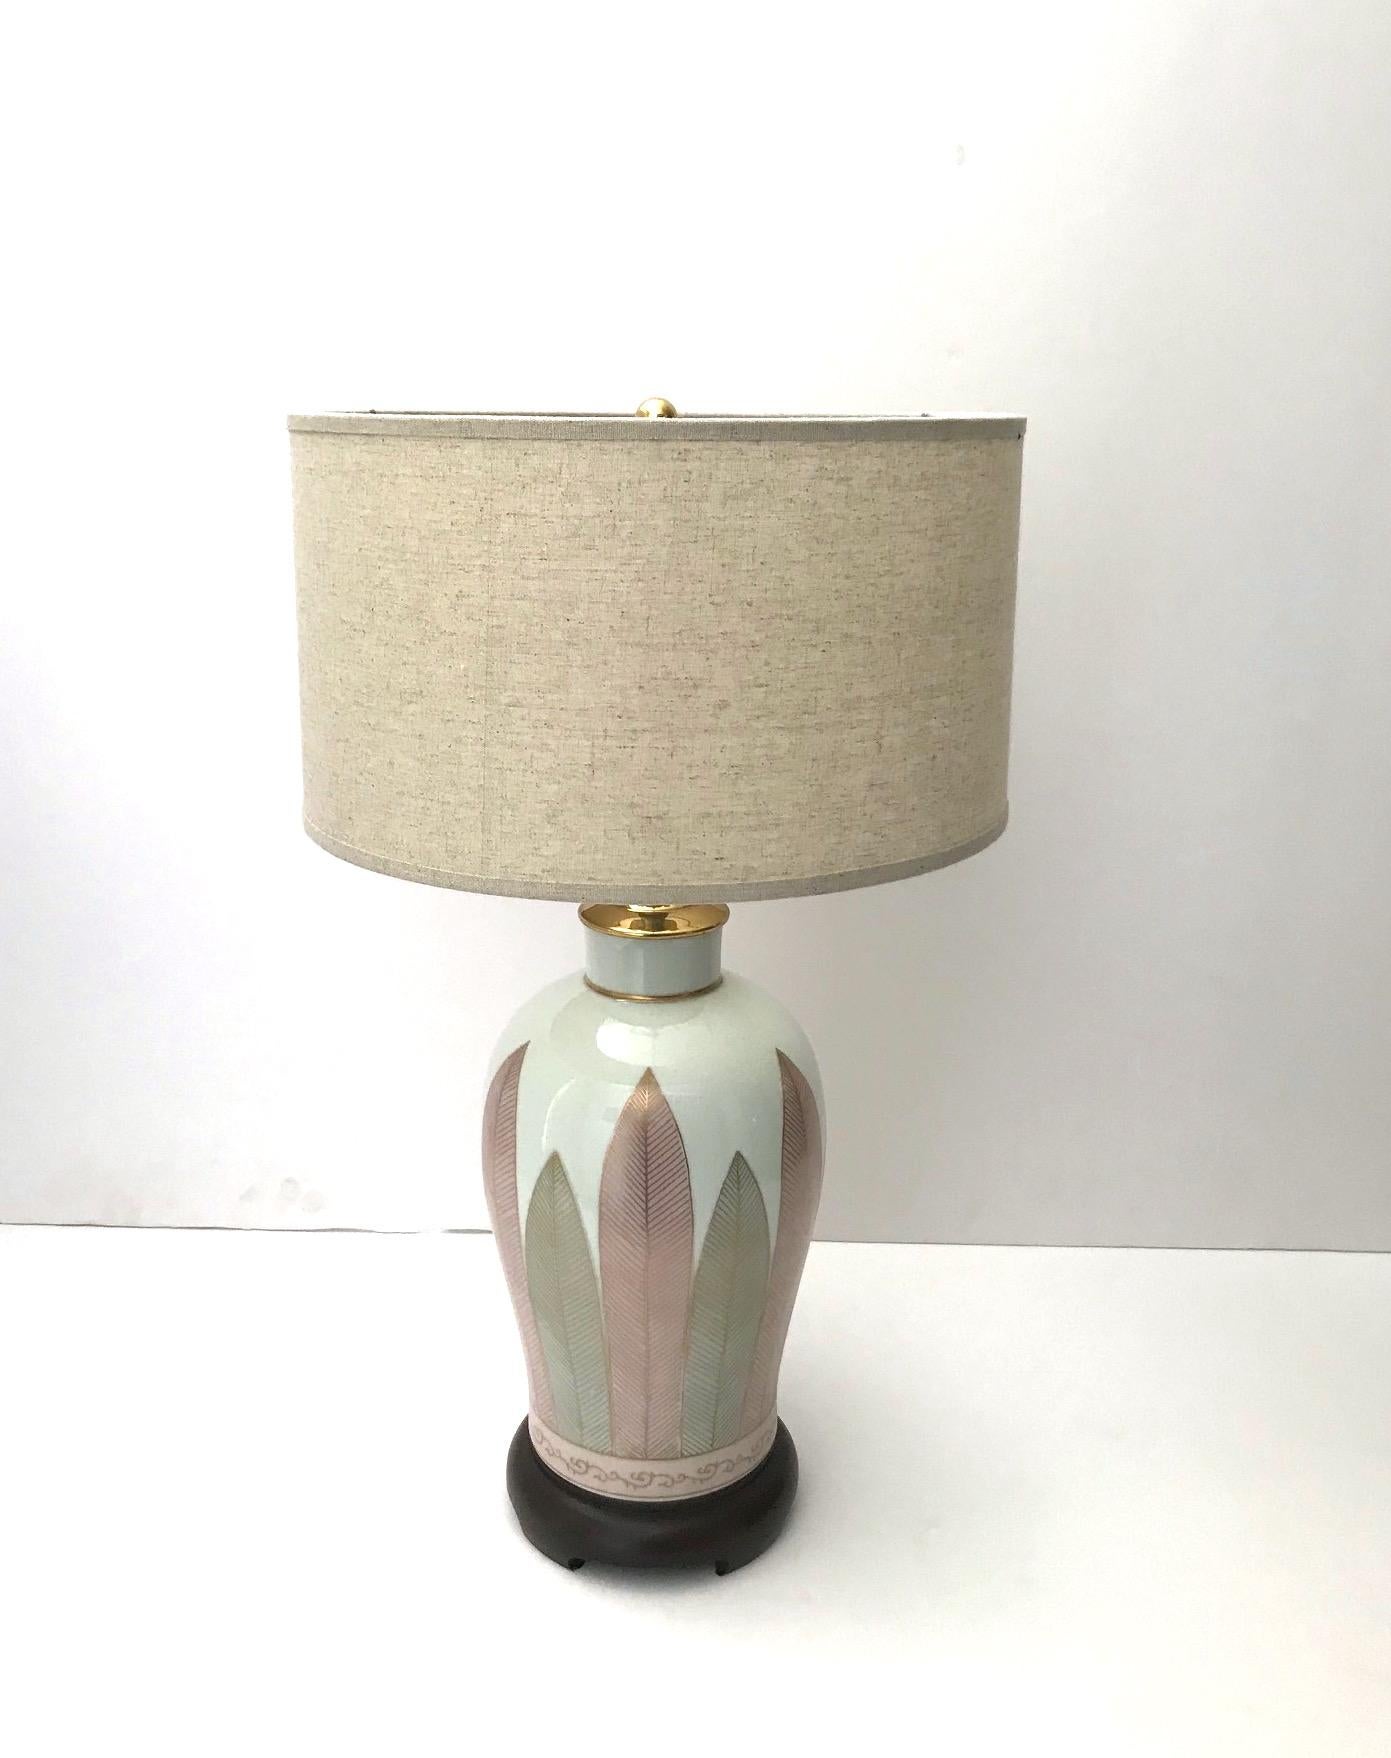 Pair of Japanese Hand Painted Porcelain Lamps in White, Grey, and Pink, C. 1970s For Sale 4